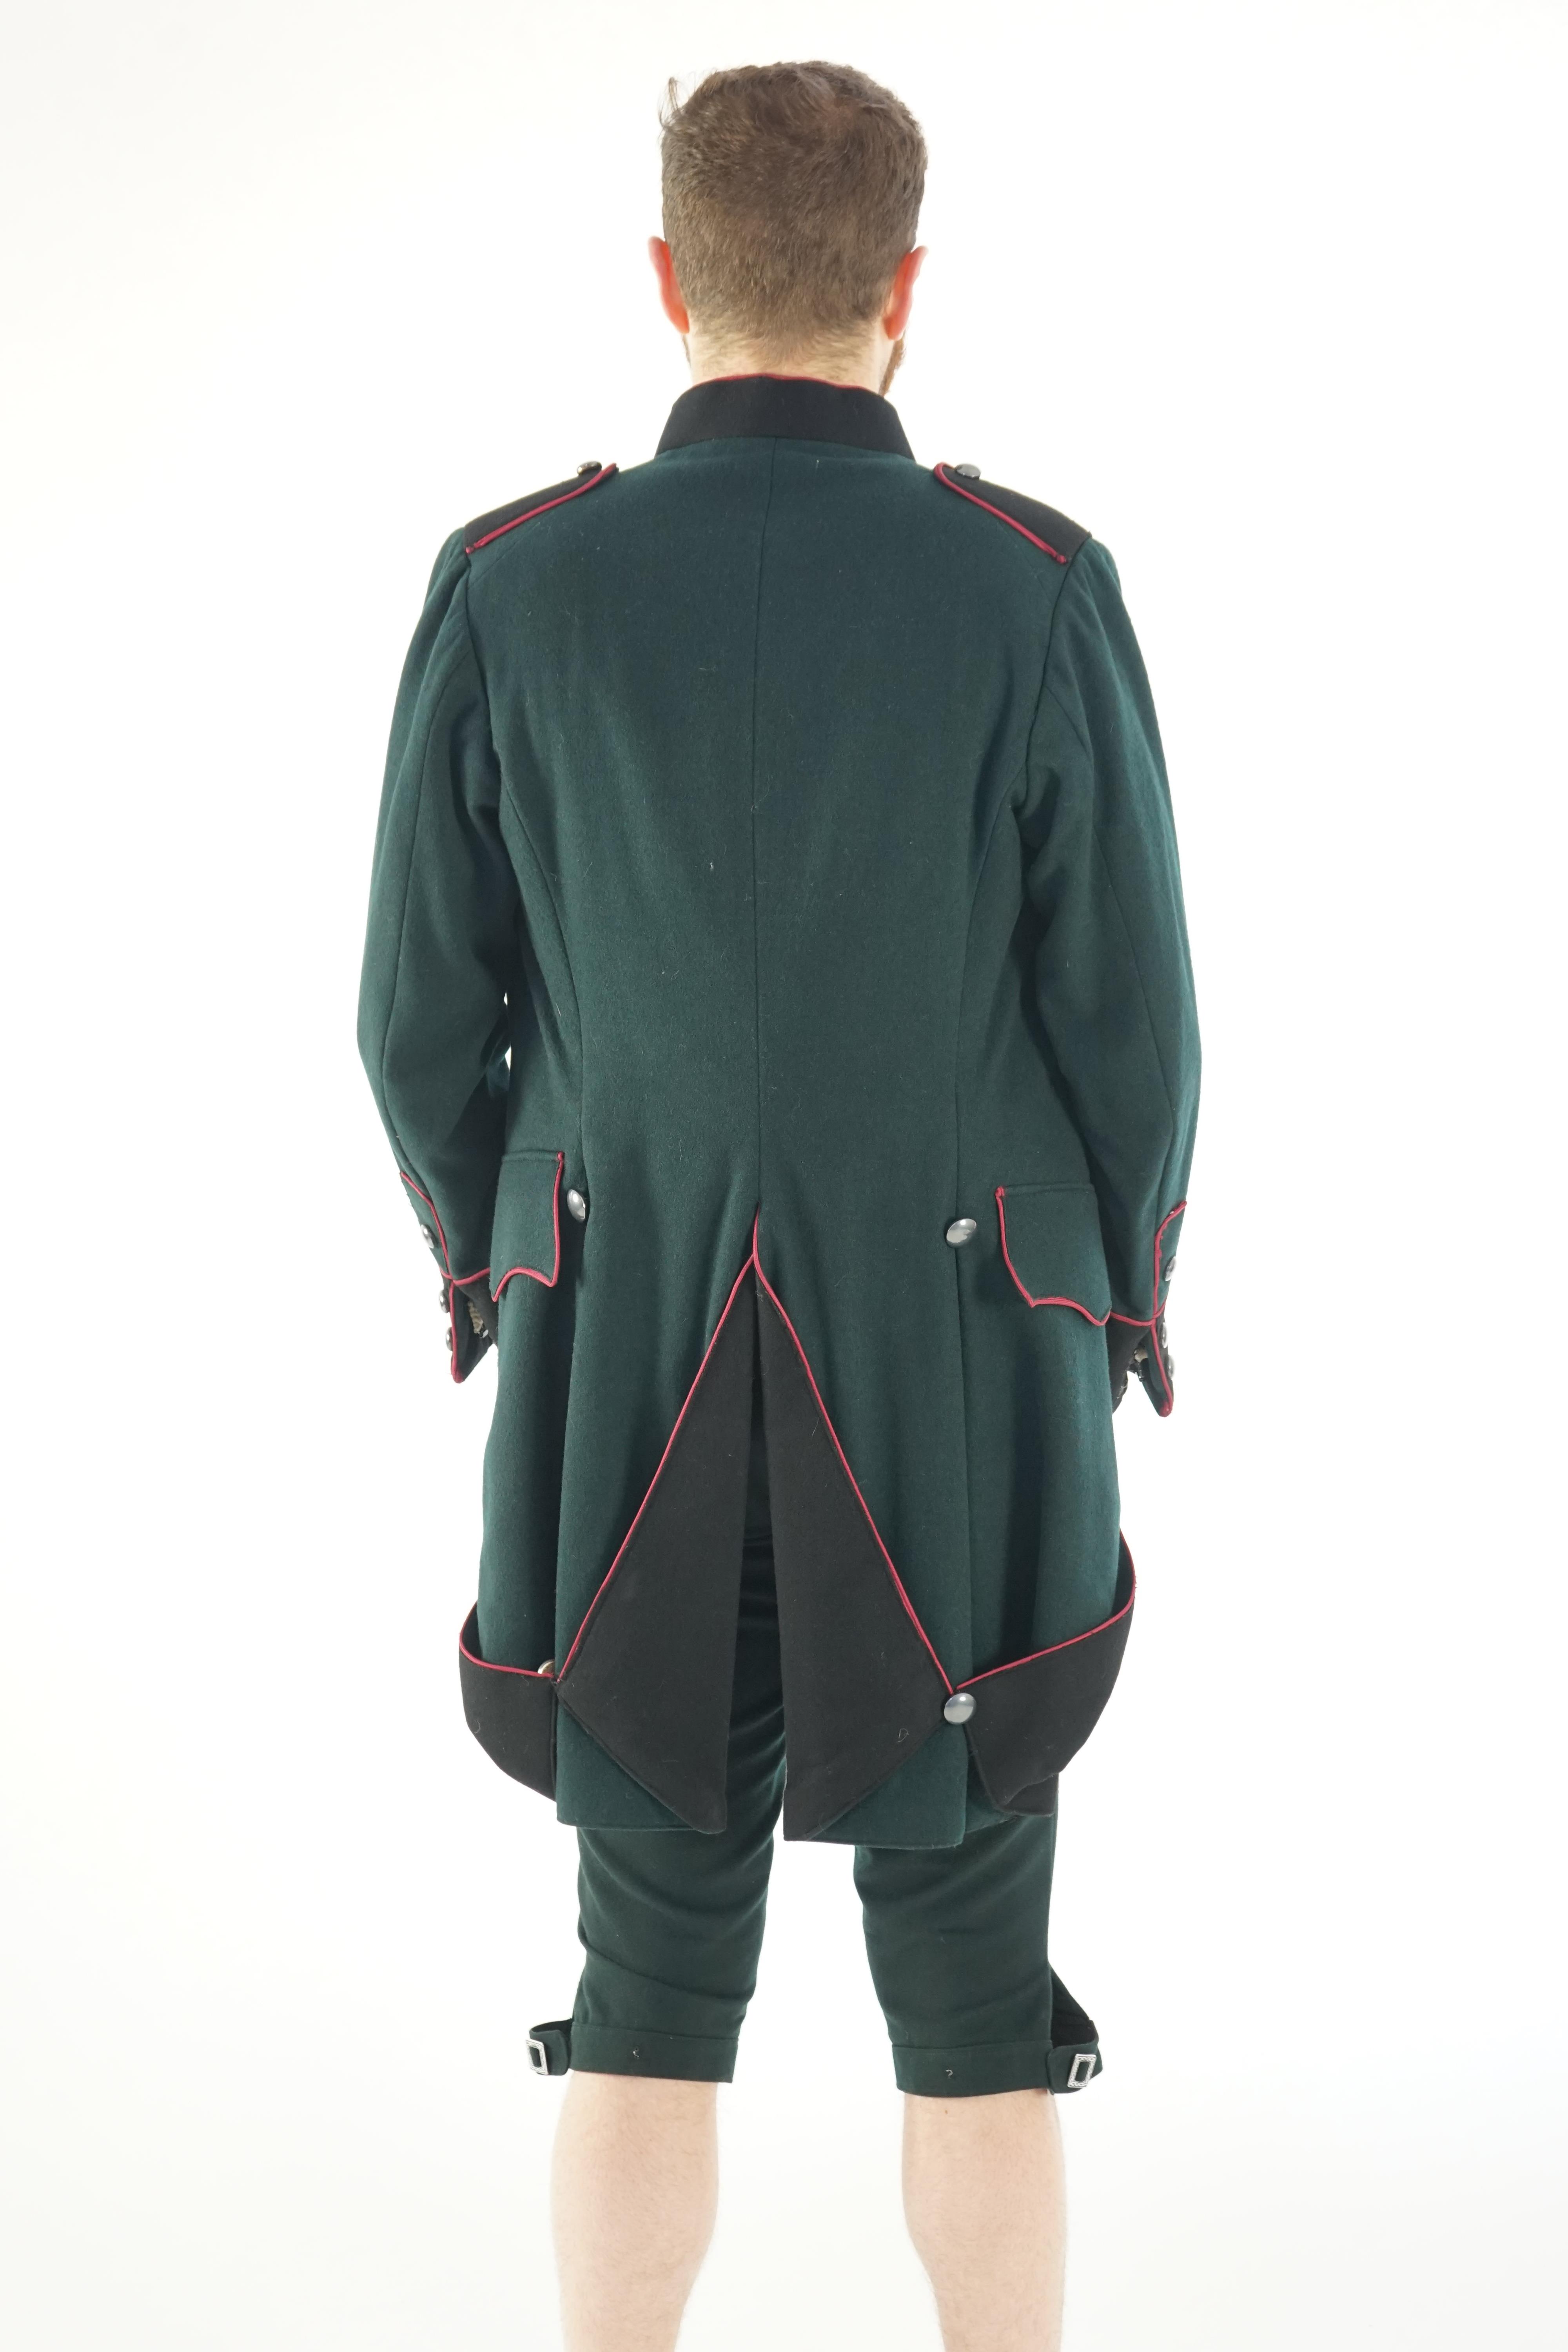 A dark green and black 18th Century style military uniform (jacket, waistcoat and breeches). Ex Royal Opera House - Soldier 'The Barber of Seville' 1993